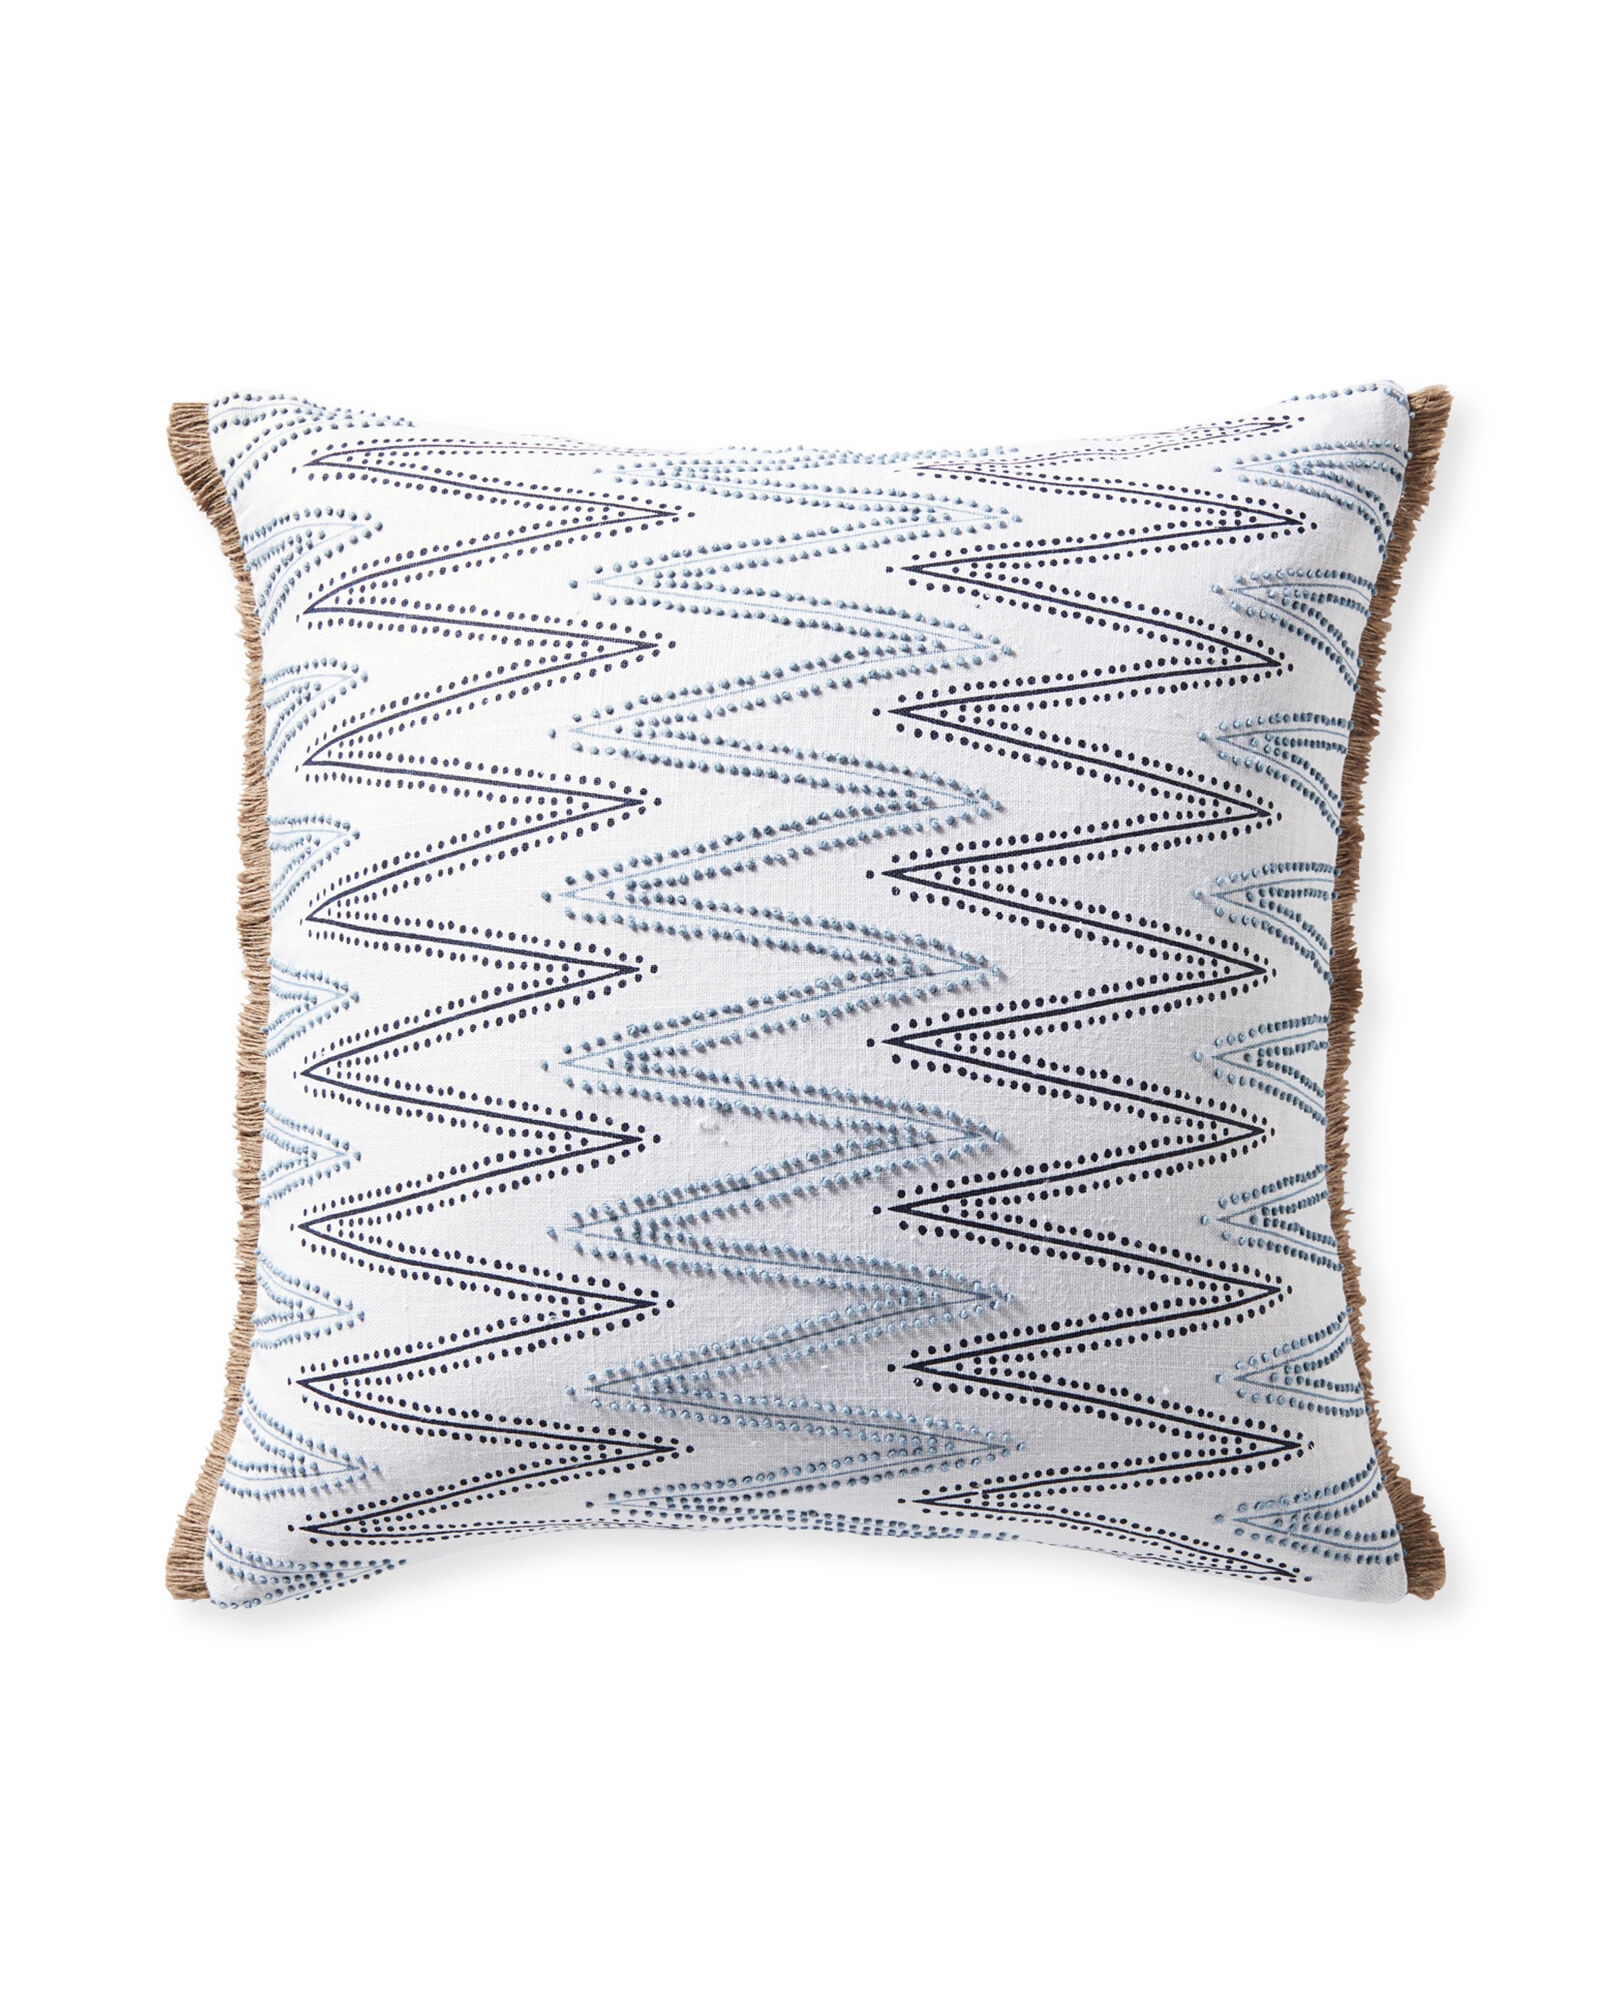 Marbella Pillow Cover - Image 0